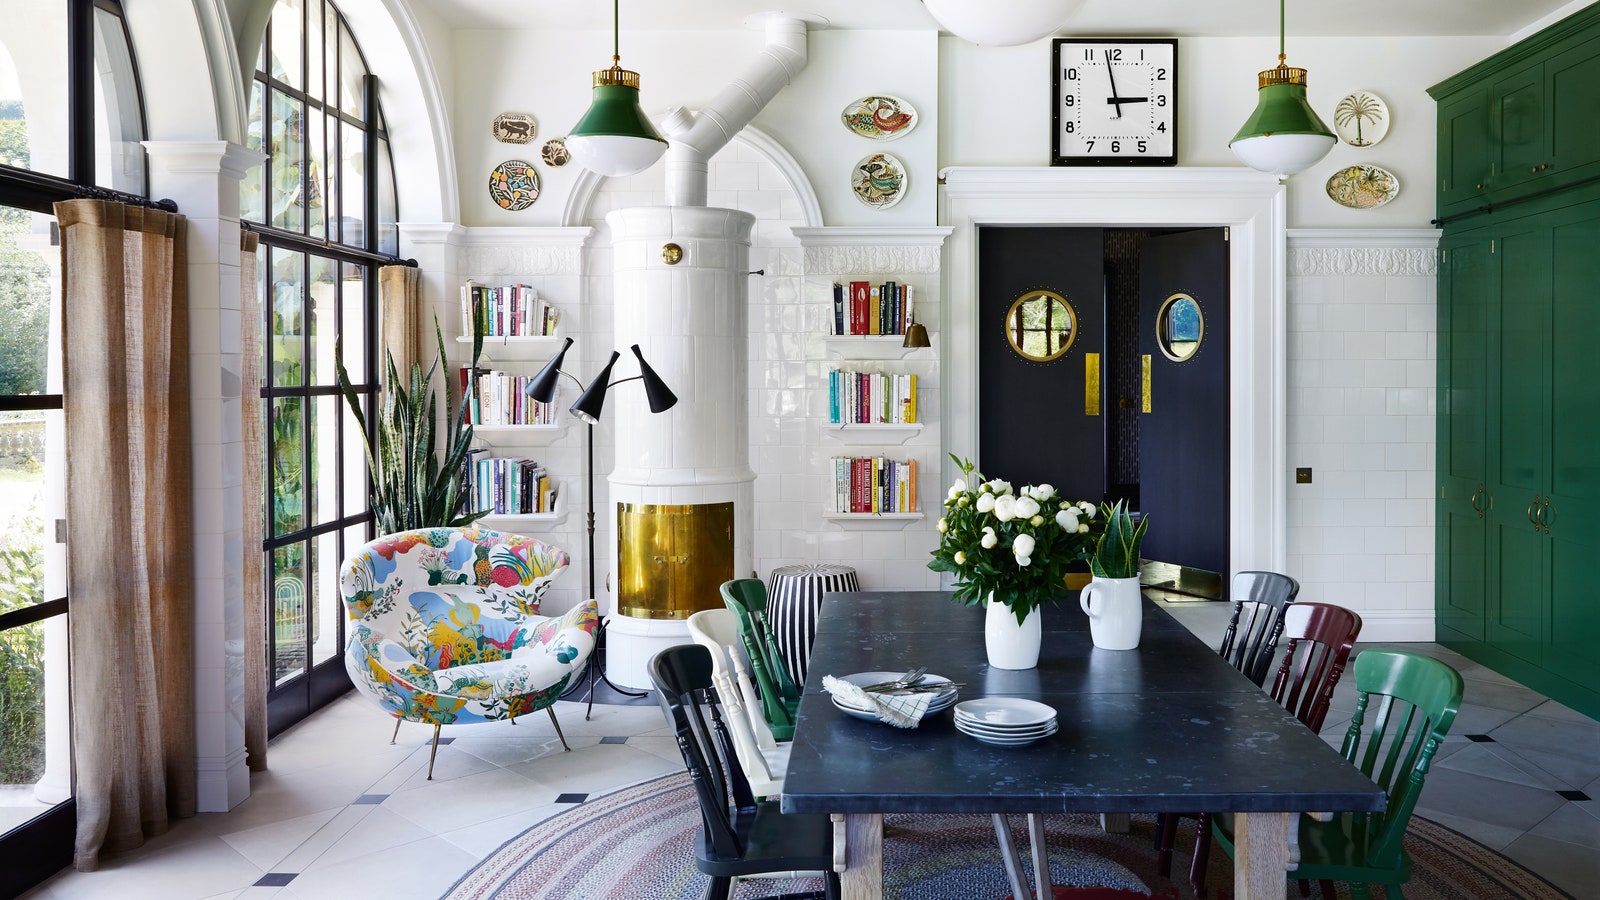 The full list of the Top 100 interior designers and architects